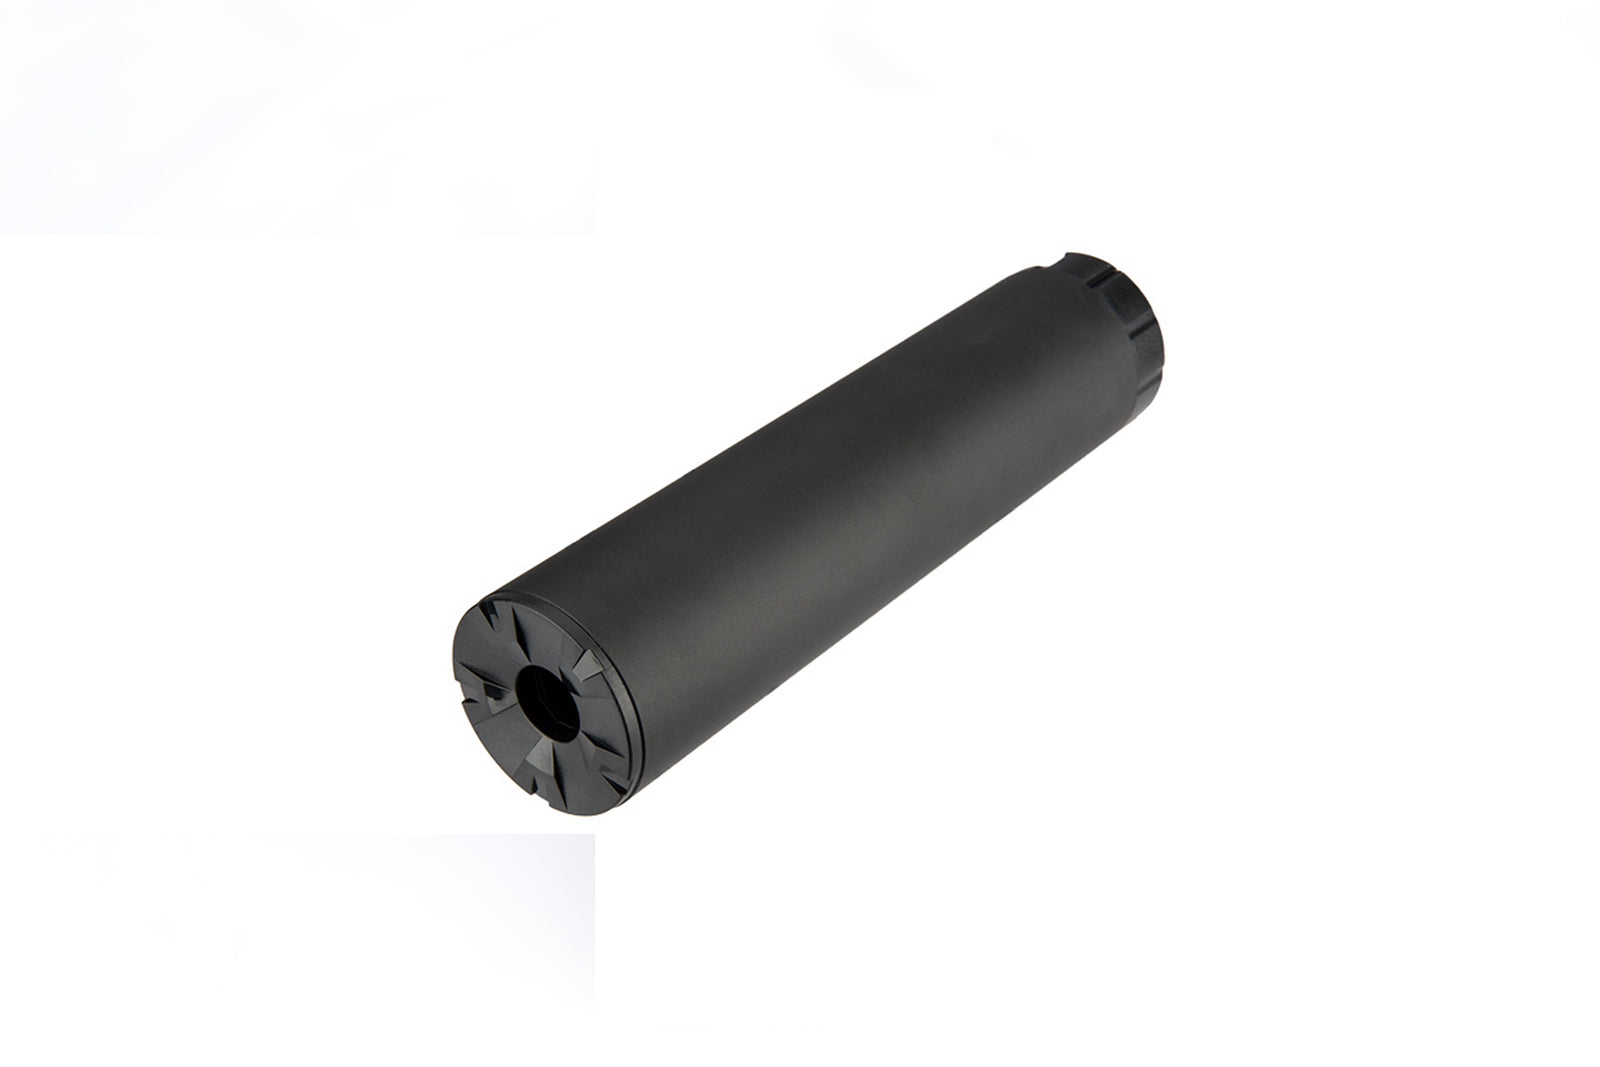 ACETECH AT1000 Airsoft Mock Silencer Tracer Unit